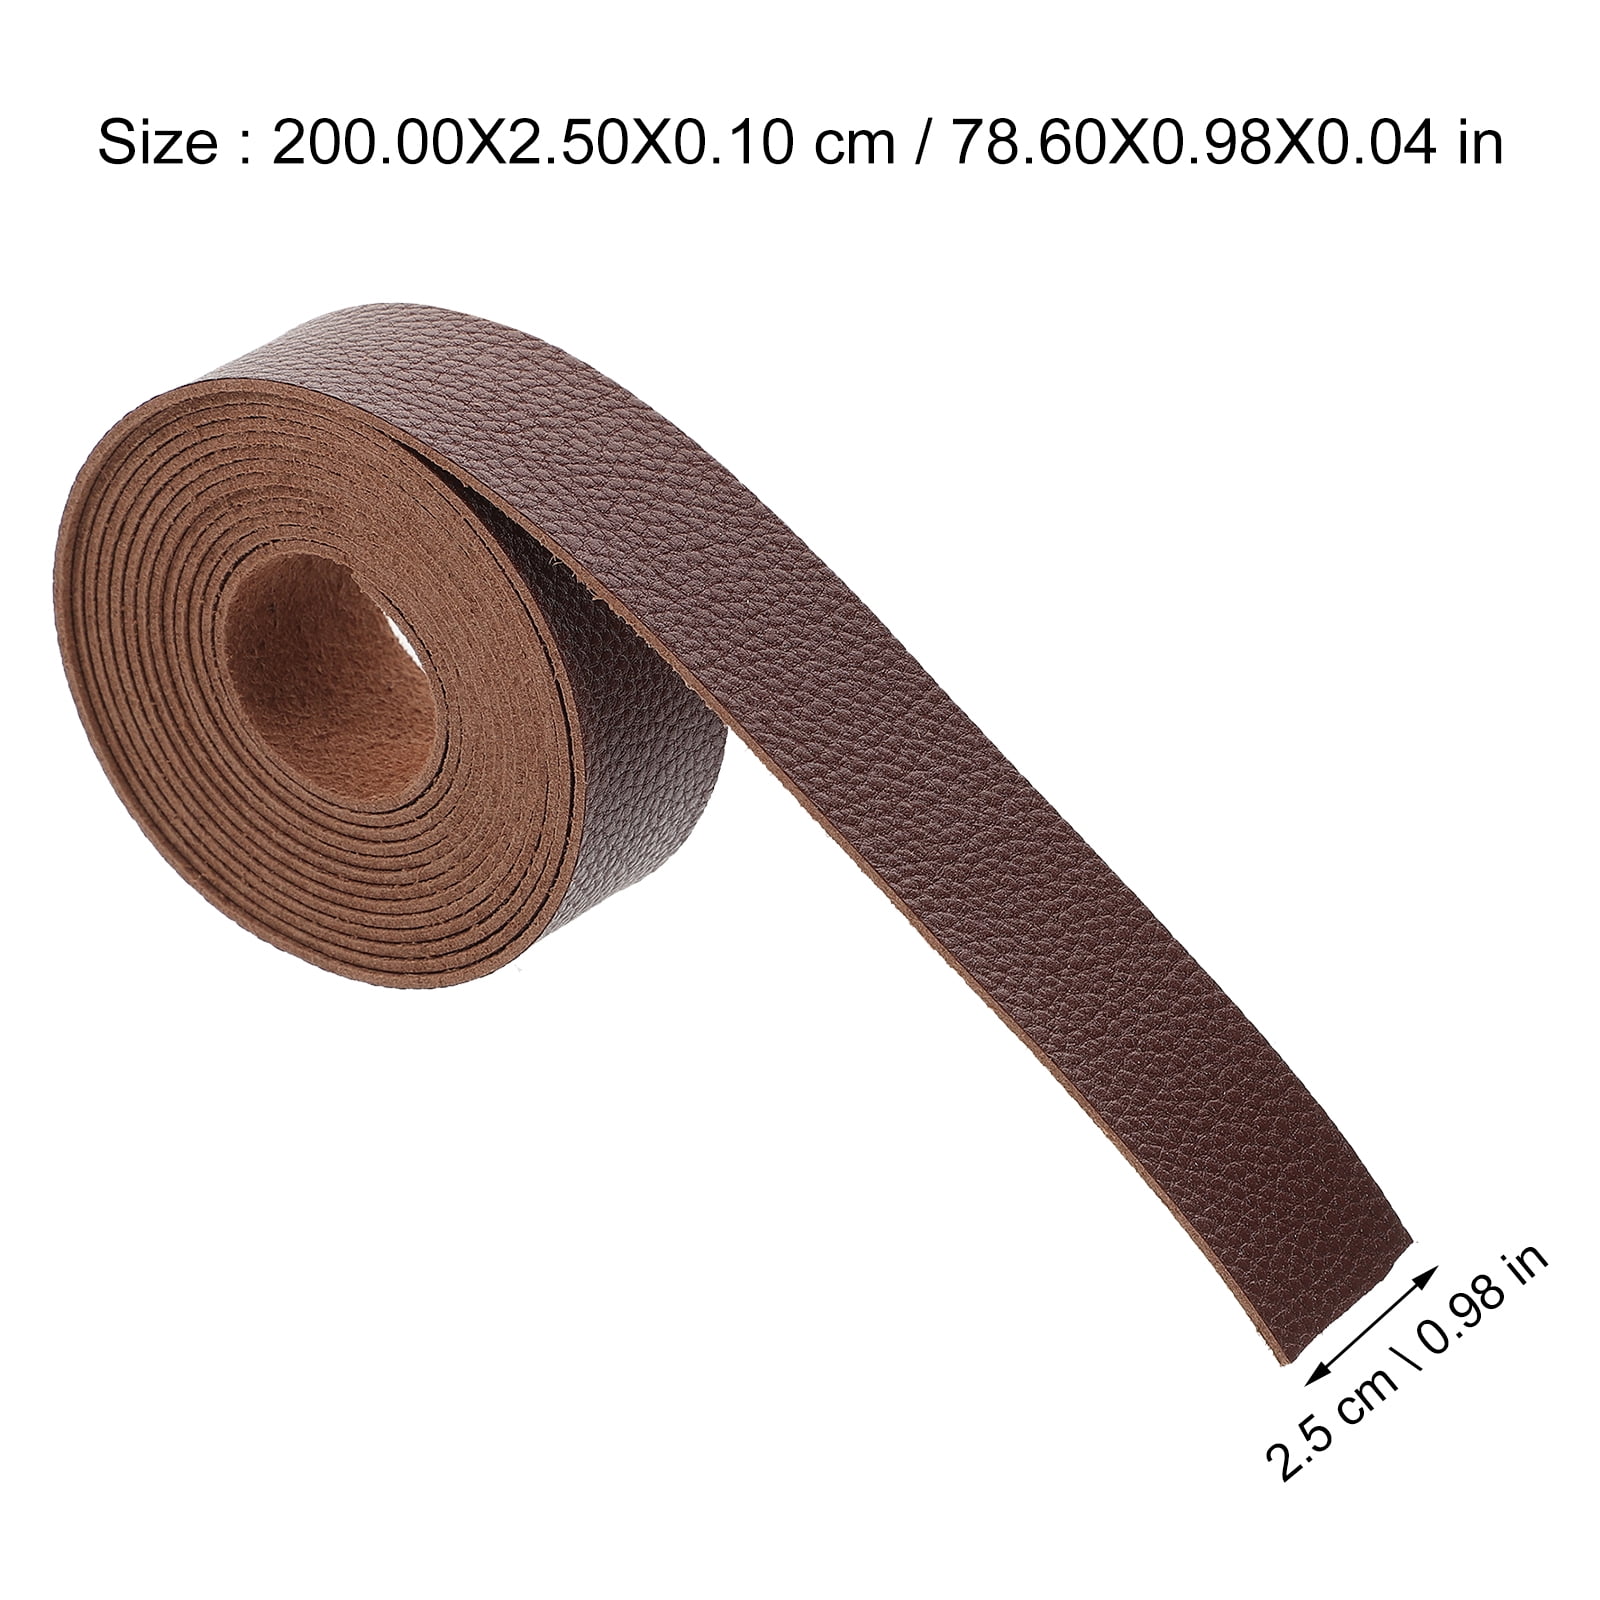 Fan&Ran Genuine Leather Strip 1/4 inch Wide 72 Inches Long for DIY Craft Projects, 1.8-2mm Thick, Bourbon Brown